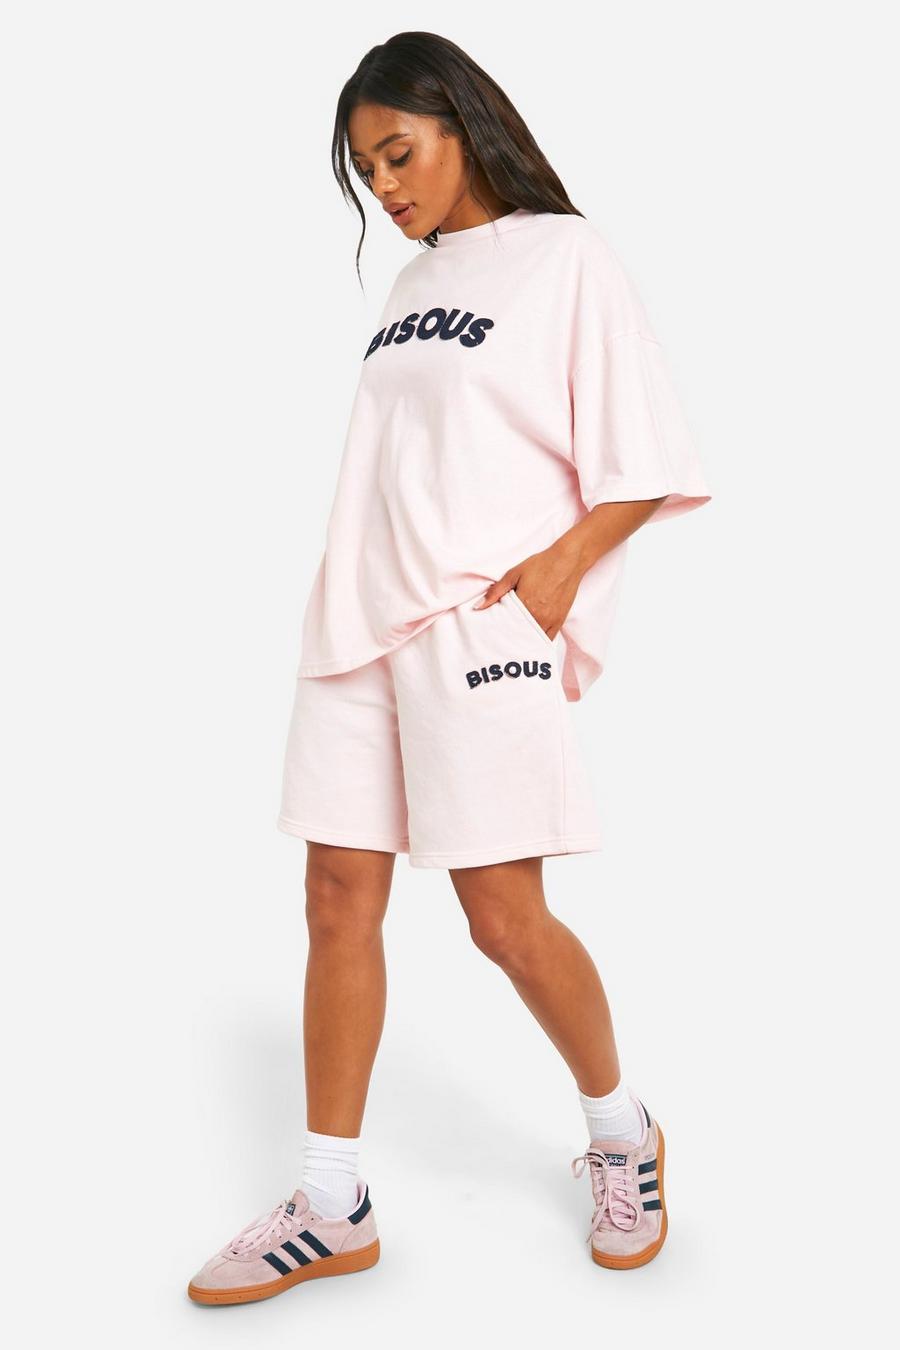 Baby pink Oversized Bisous Denim T-Shirt